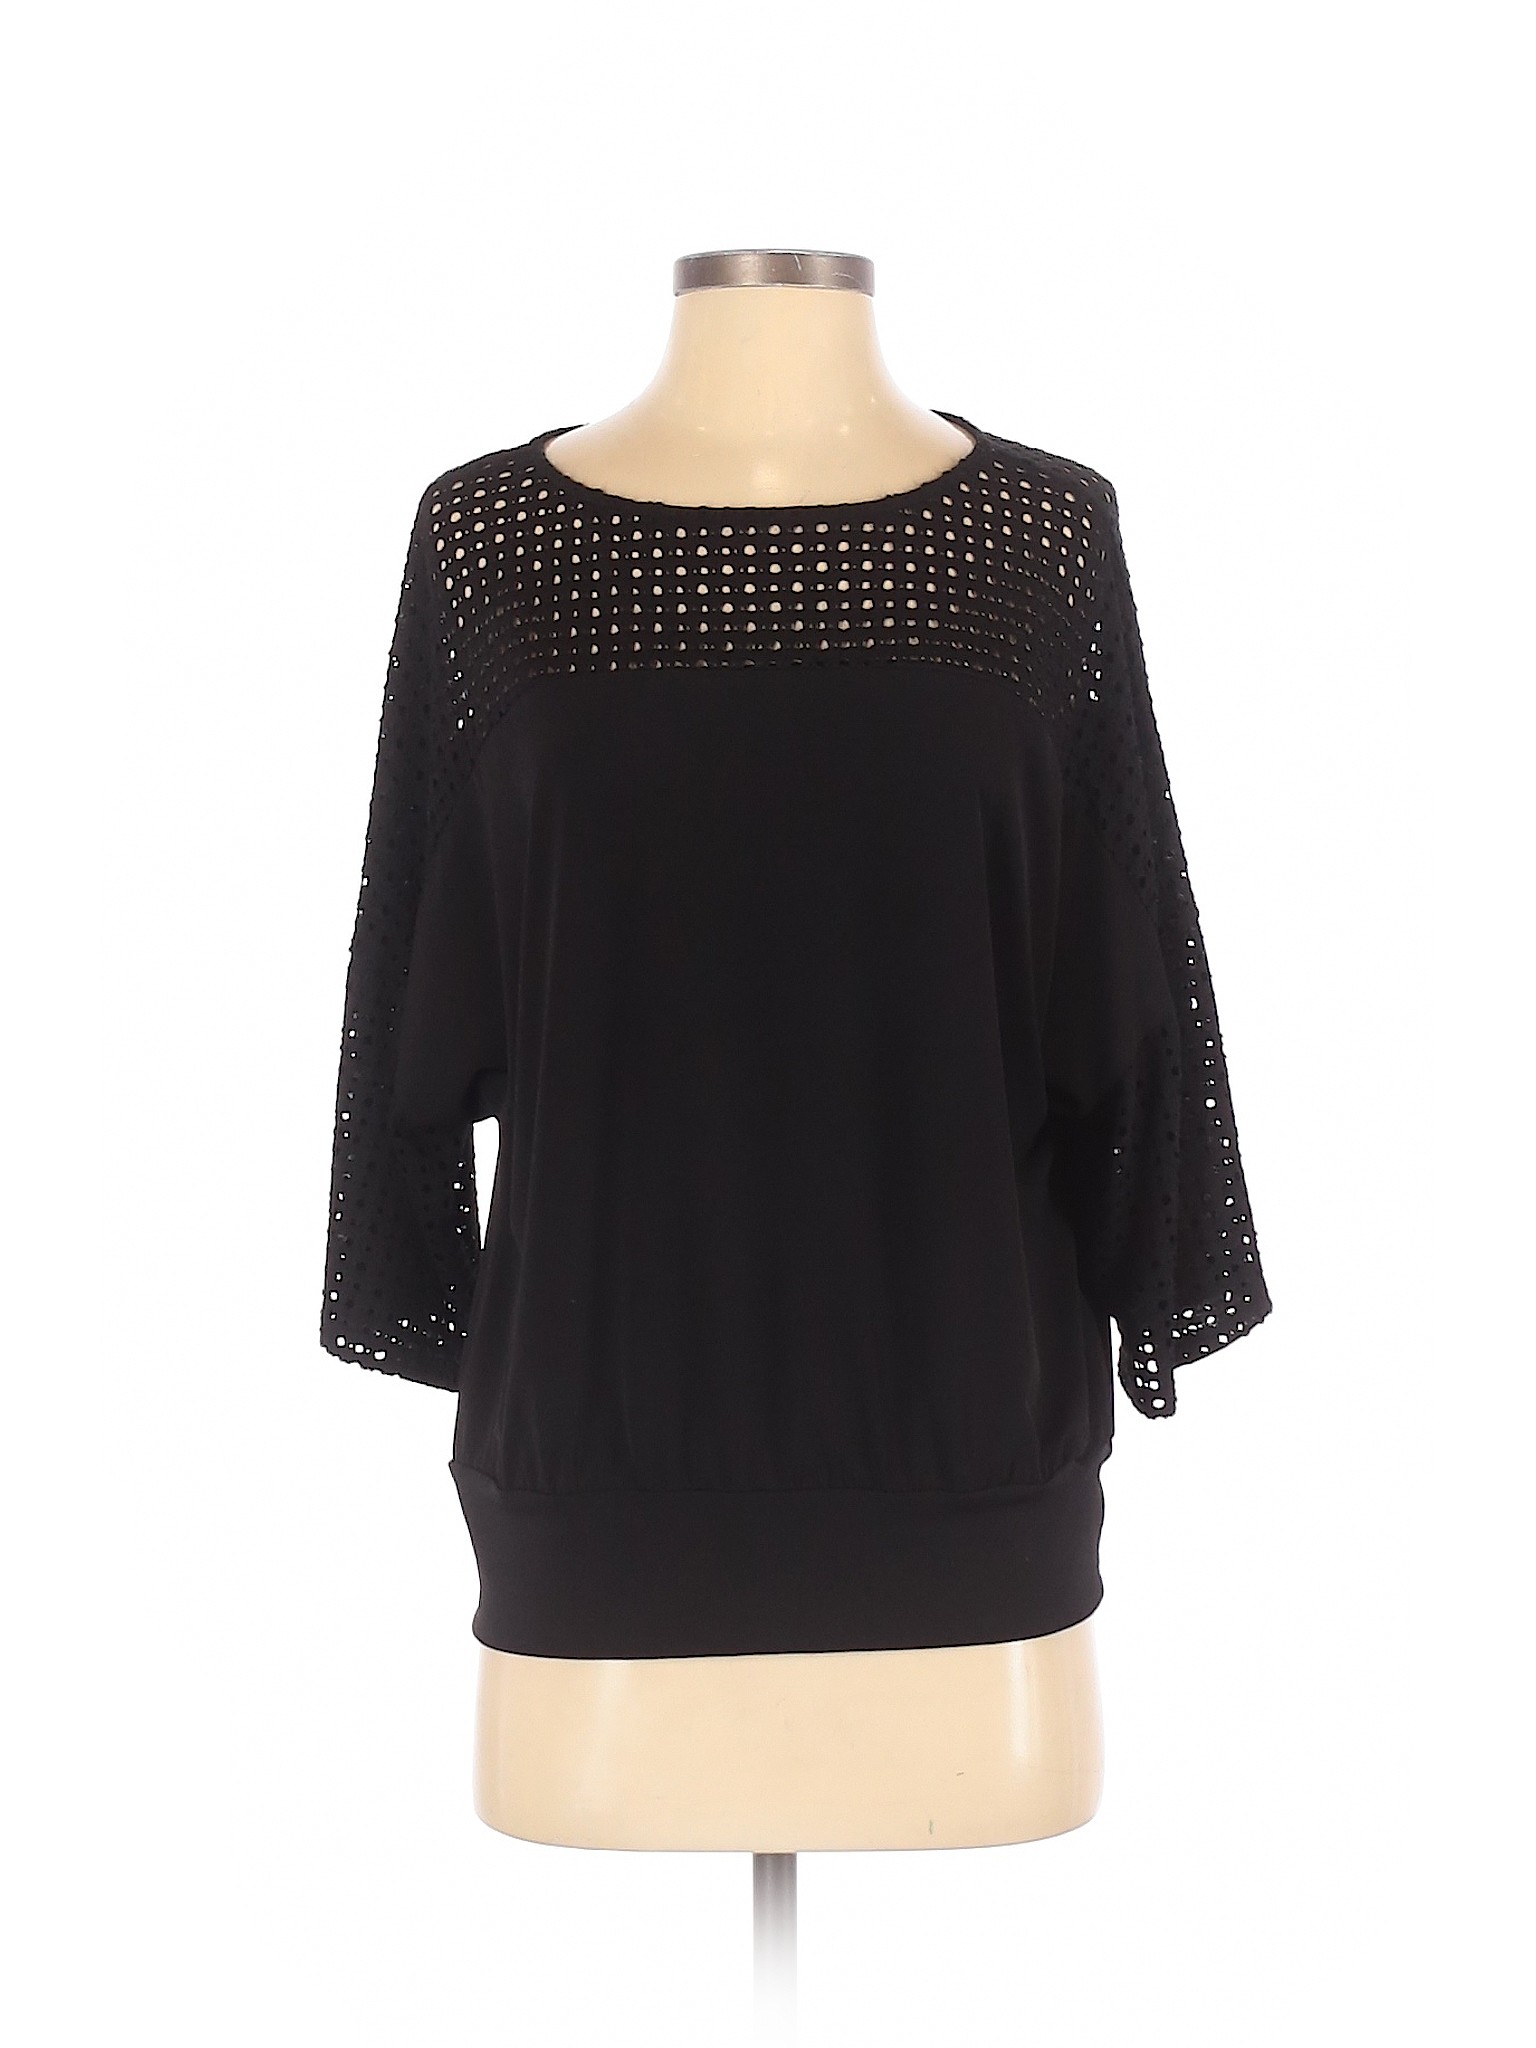 Chico's Polka Dots Black 3/4 Sleeve Blouse Size Sm (0) - 93% off | thredUP